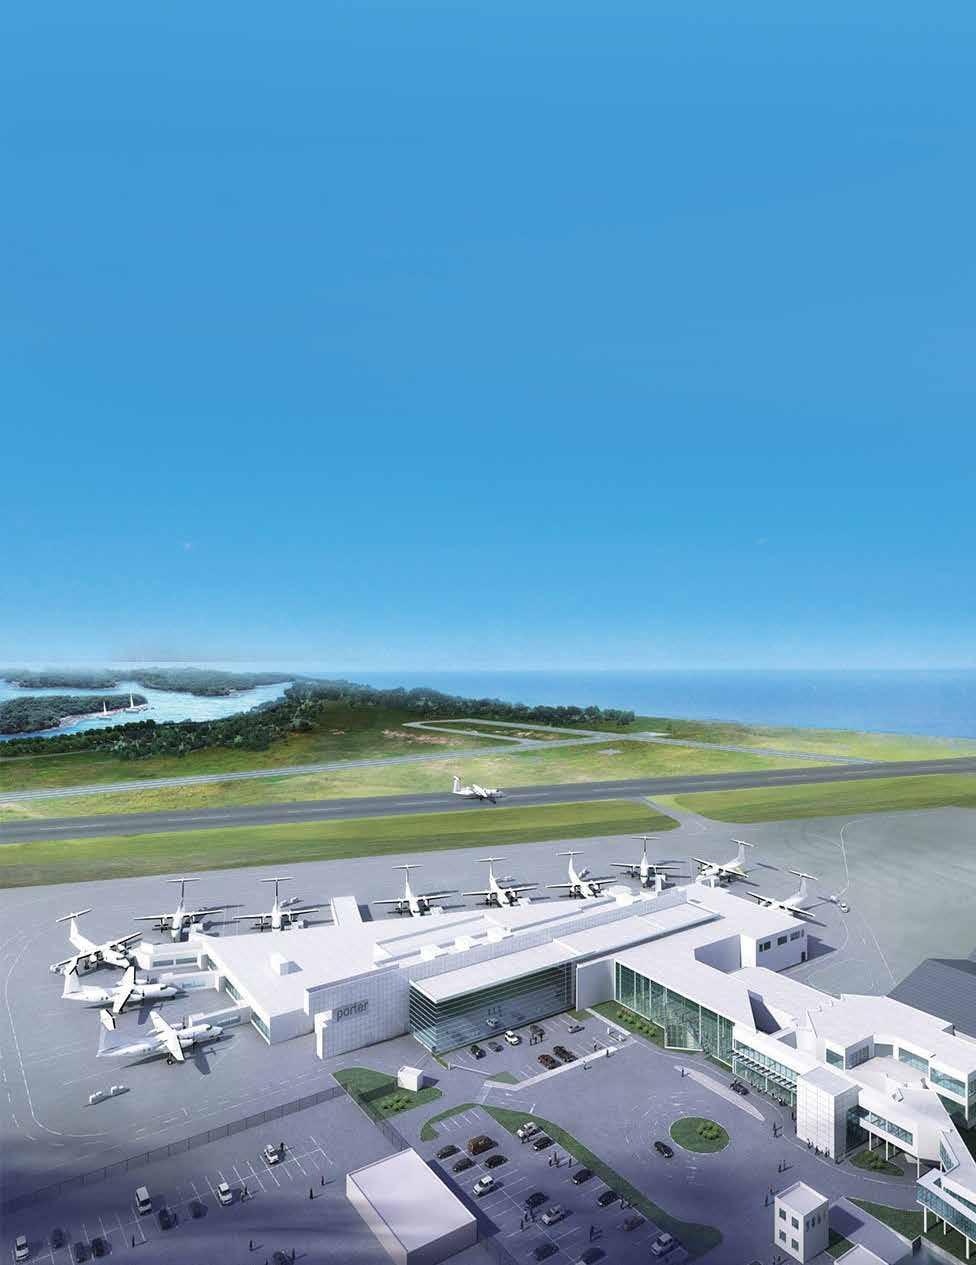 Terminal Upgrades In October 2016, PortsToronto approved plans submitted by Nieuport Aviation Infrastructure Partners, owner and operator of the airport s passenger terminal, to undertake upgrades